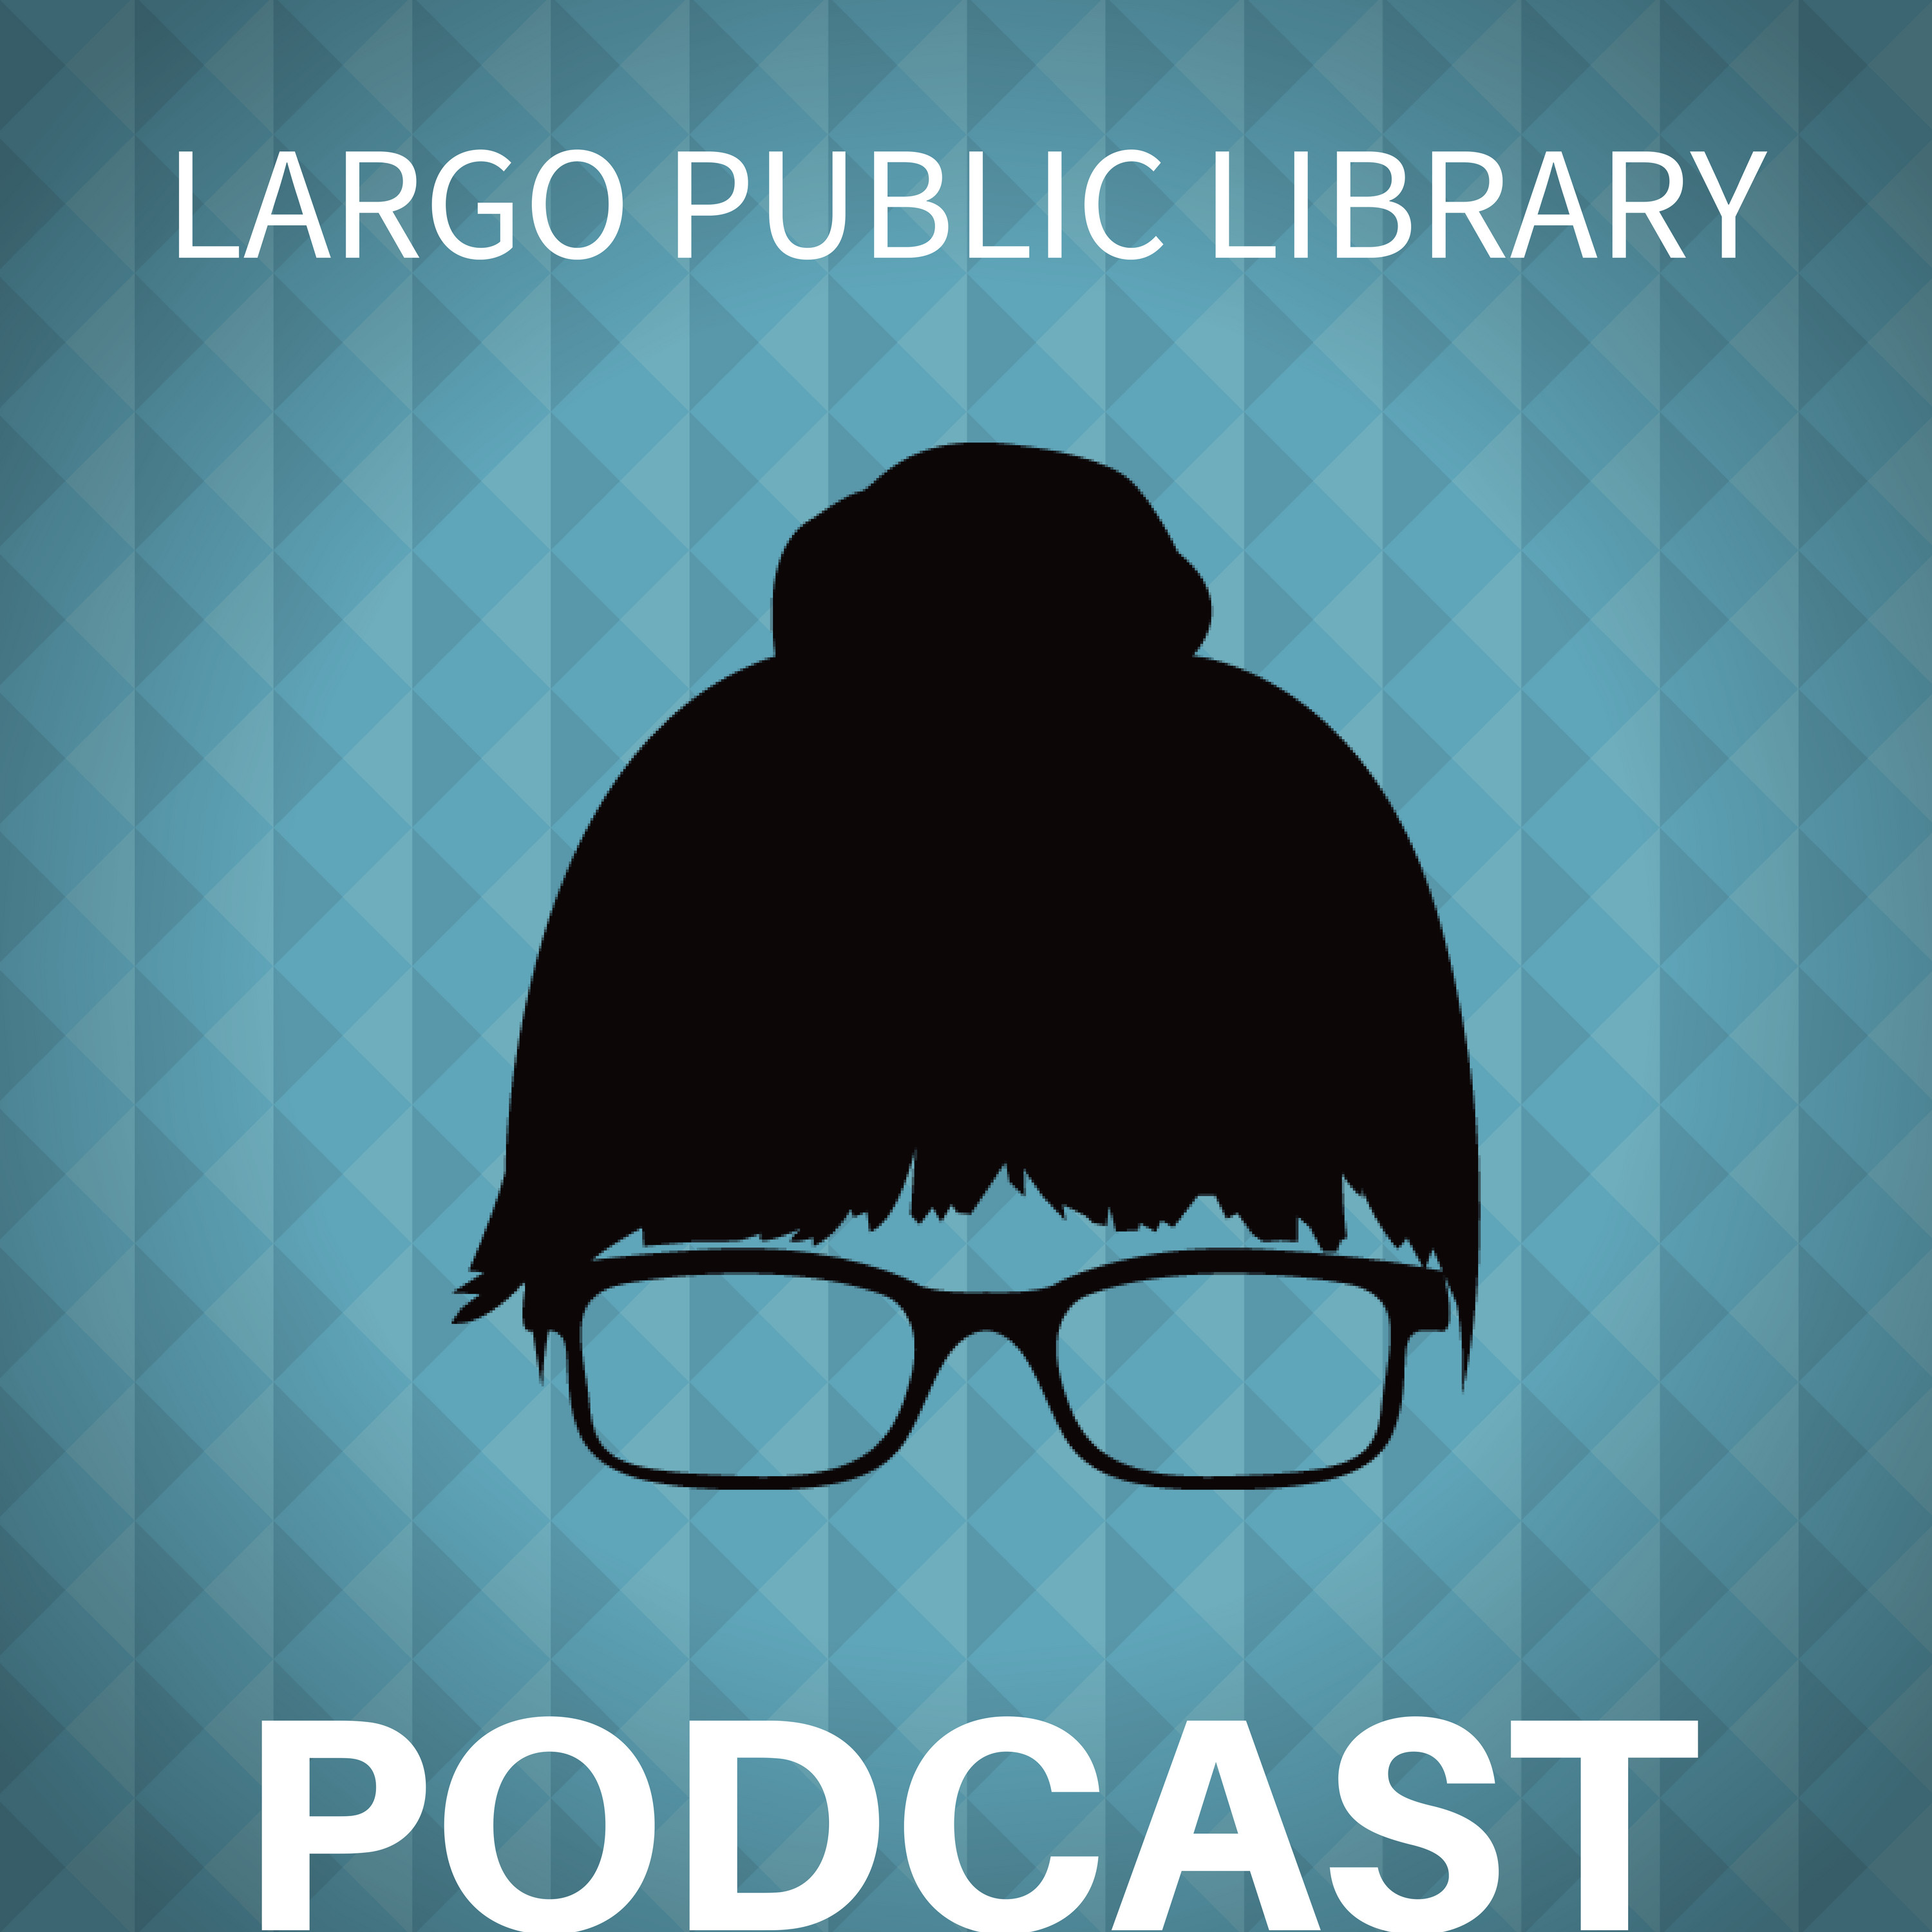 Page Turn the Largo Public Library Podcast